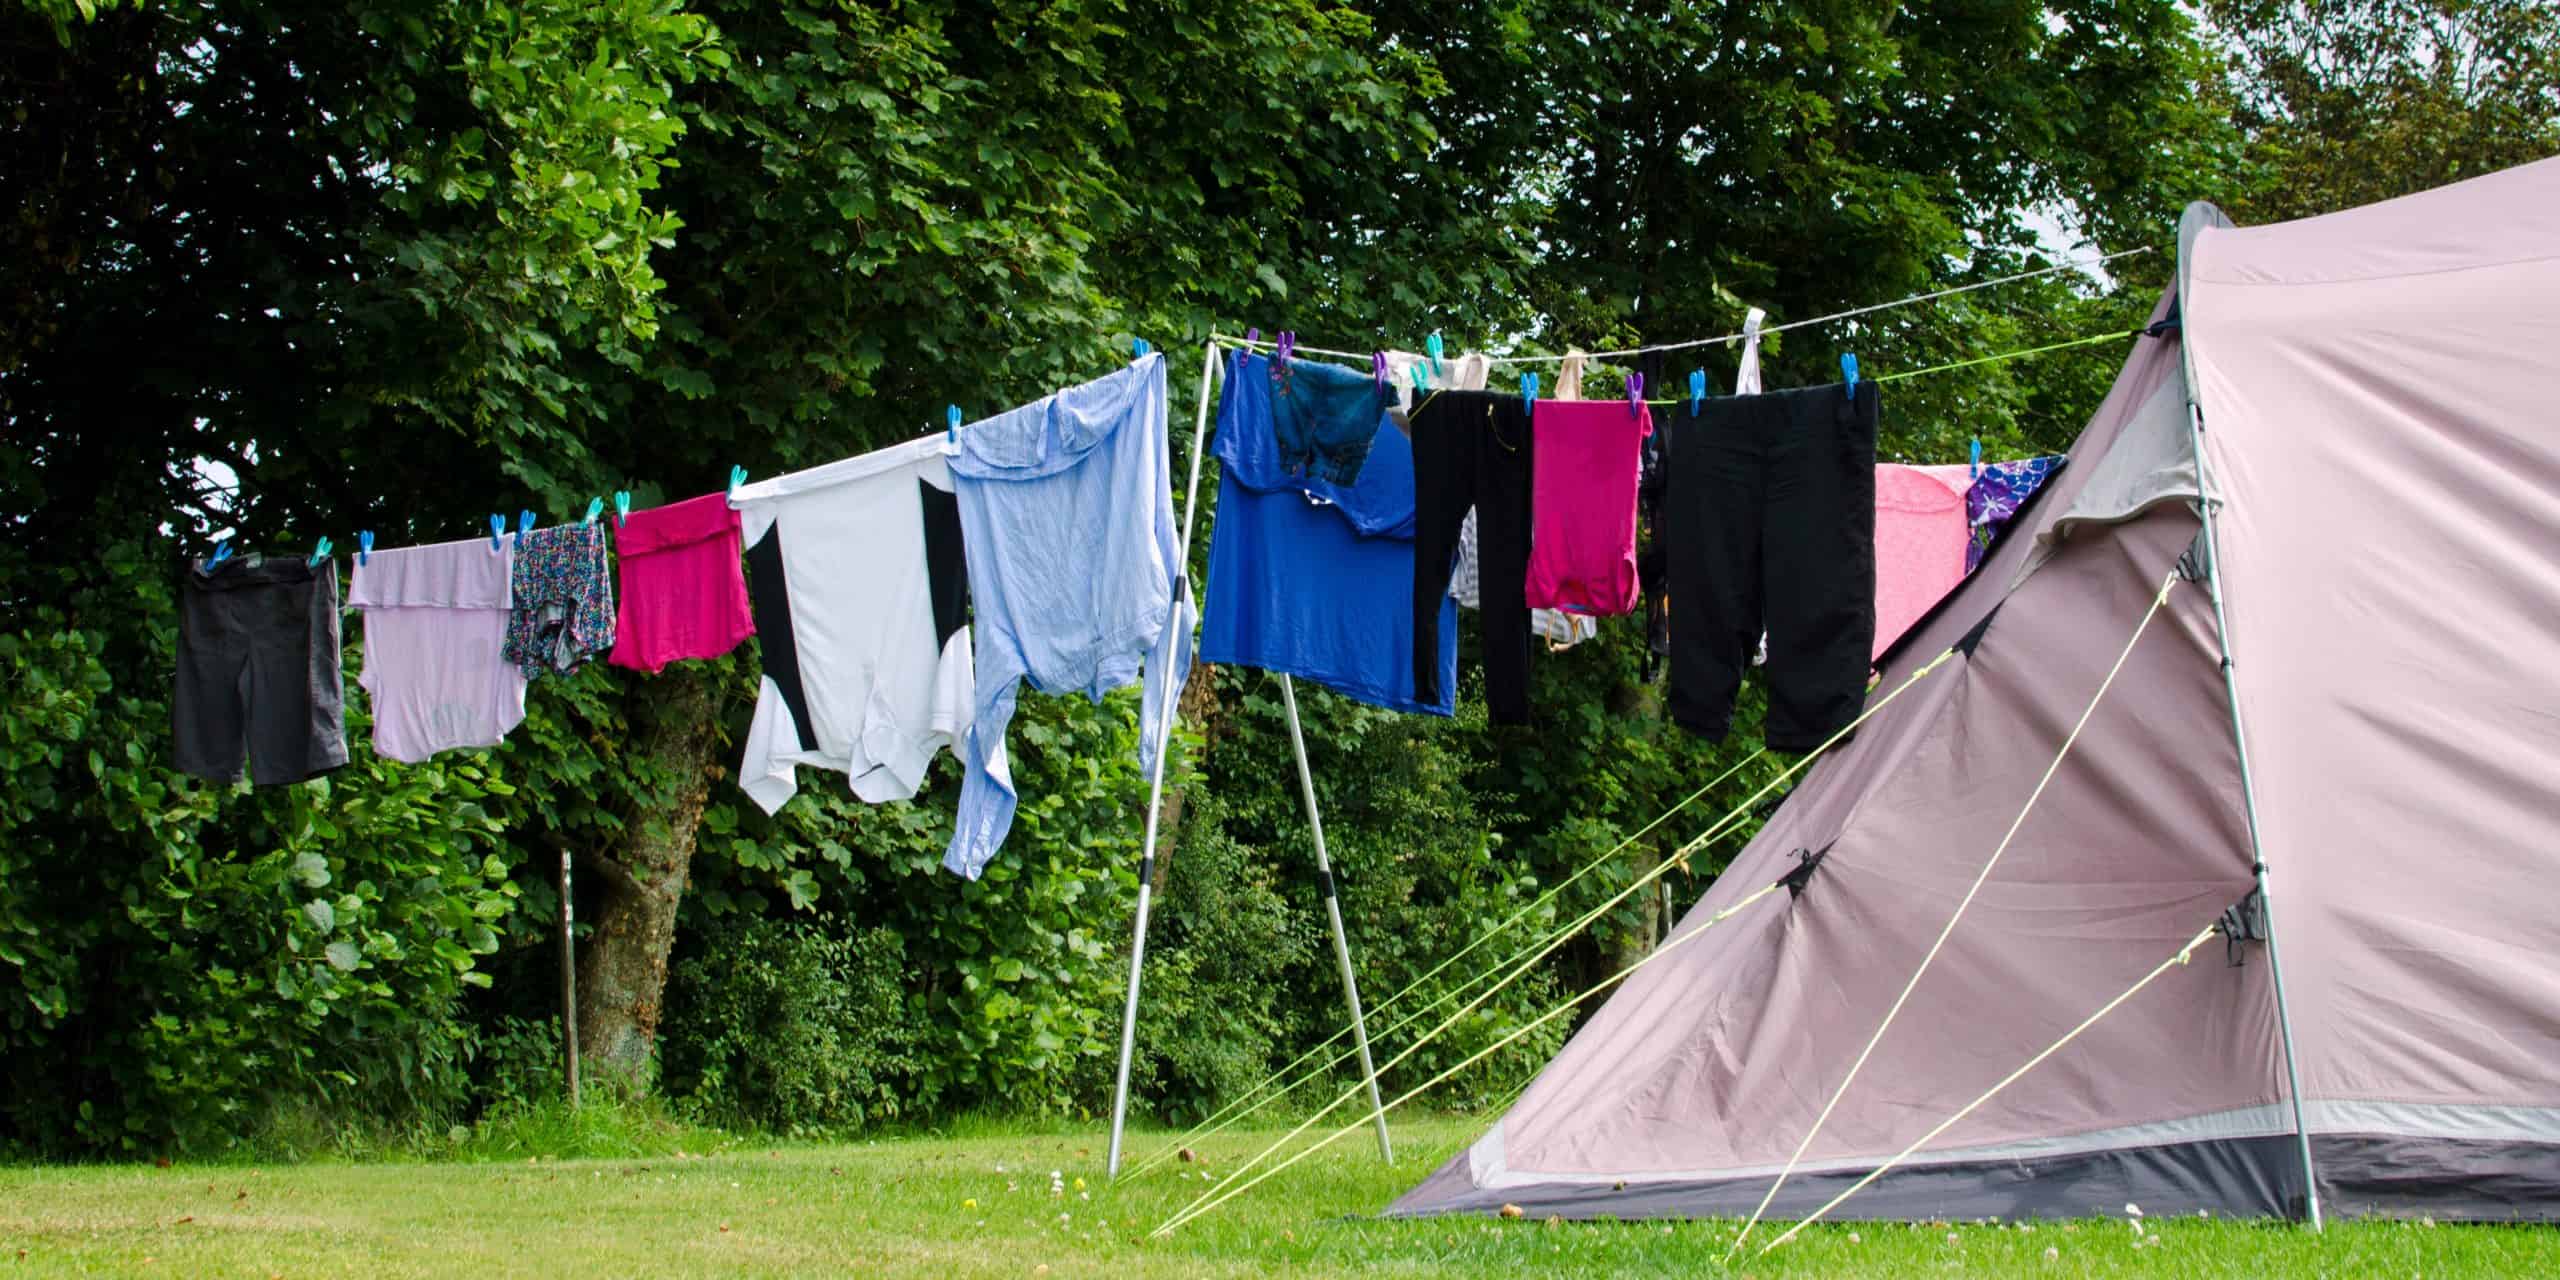 Camping clothesline set up on campground